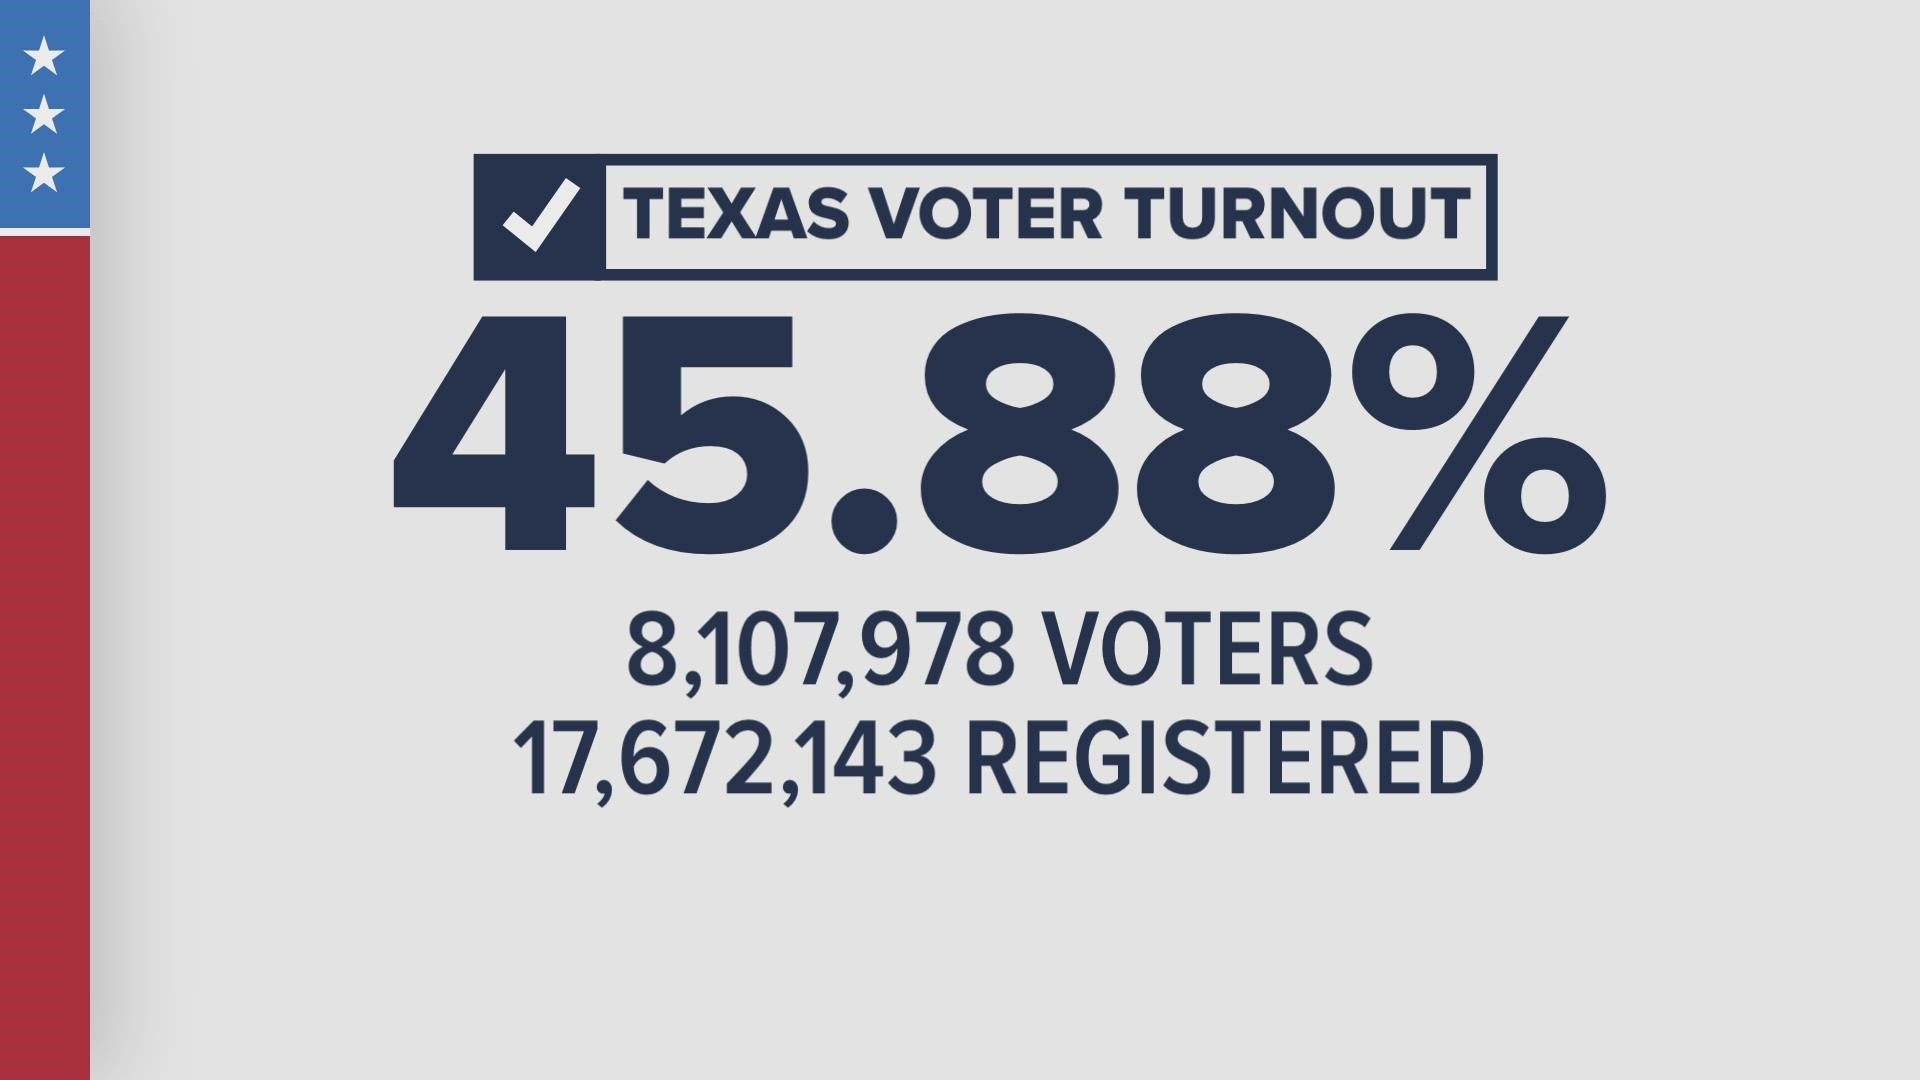 Less than half of all registered voters in Texas actually cast ballots in the midterm election – something that came as a bit of a surprise to political observers.